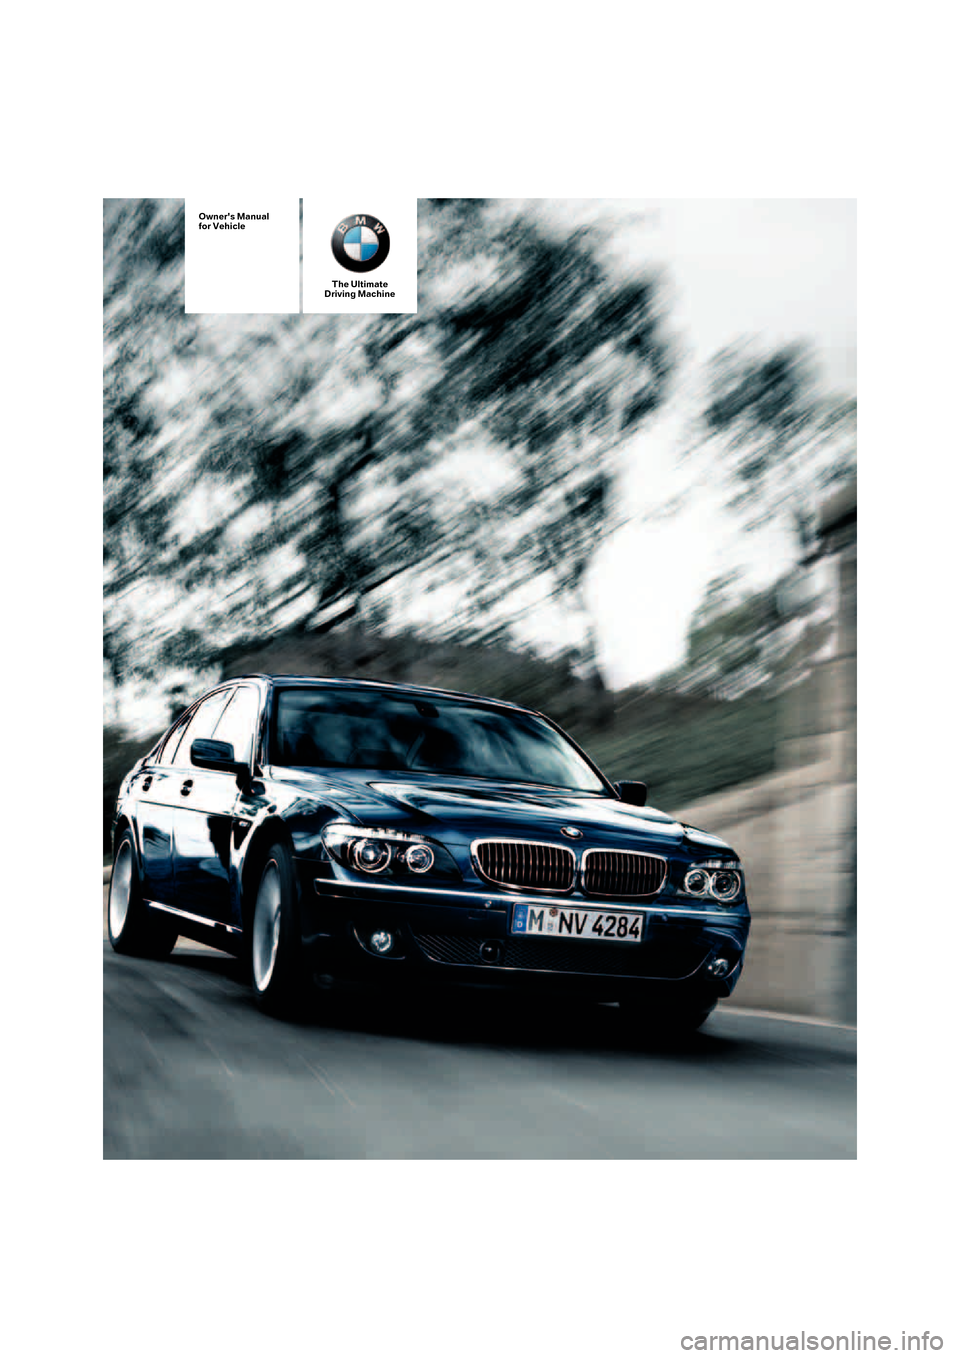 BMW 760LI 2008 E66 Owners Manual Owners Manual
for Vehicle
The Ultimate
Driving Machine 